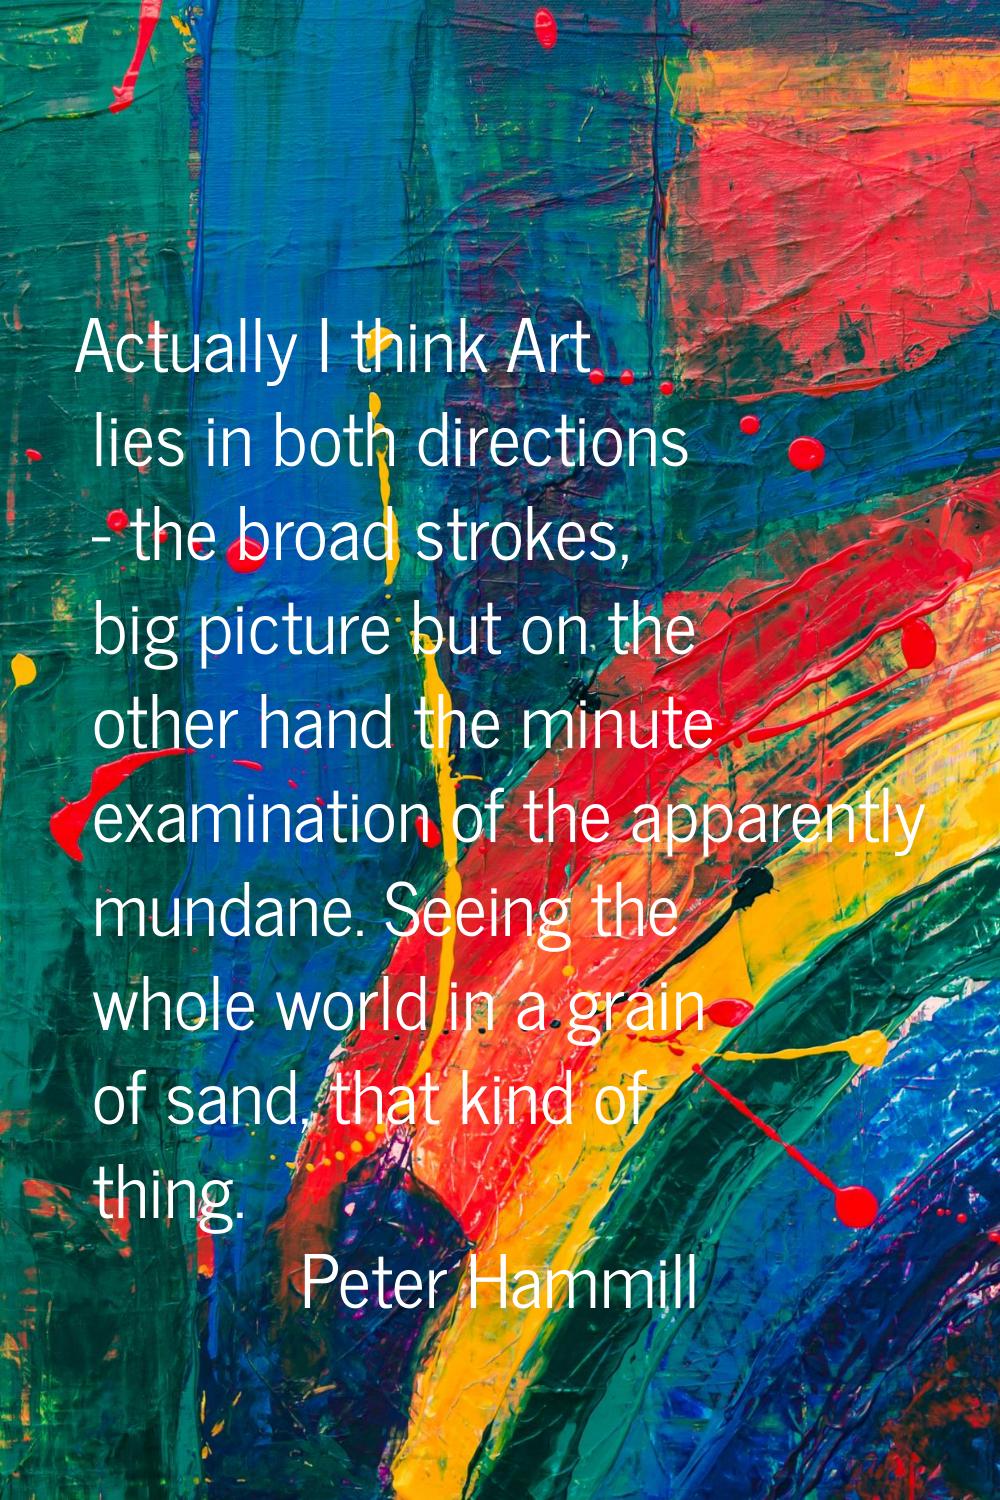 Actually I think Art lies in both directions - the broad strokes, big picture but on the other hand